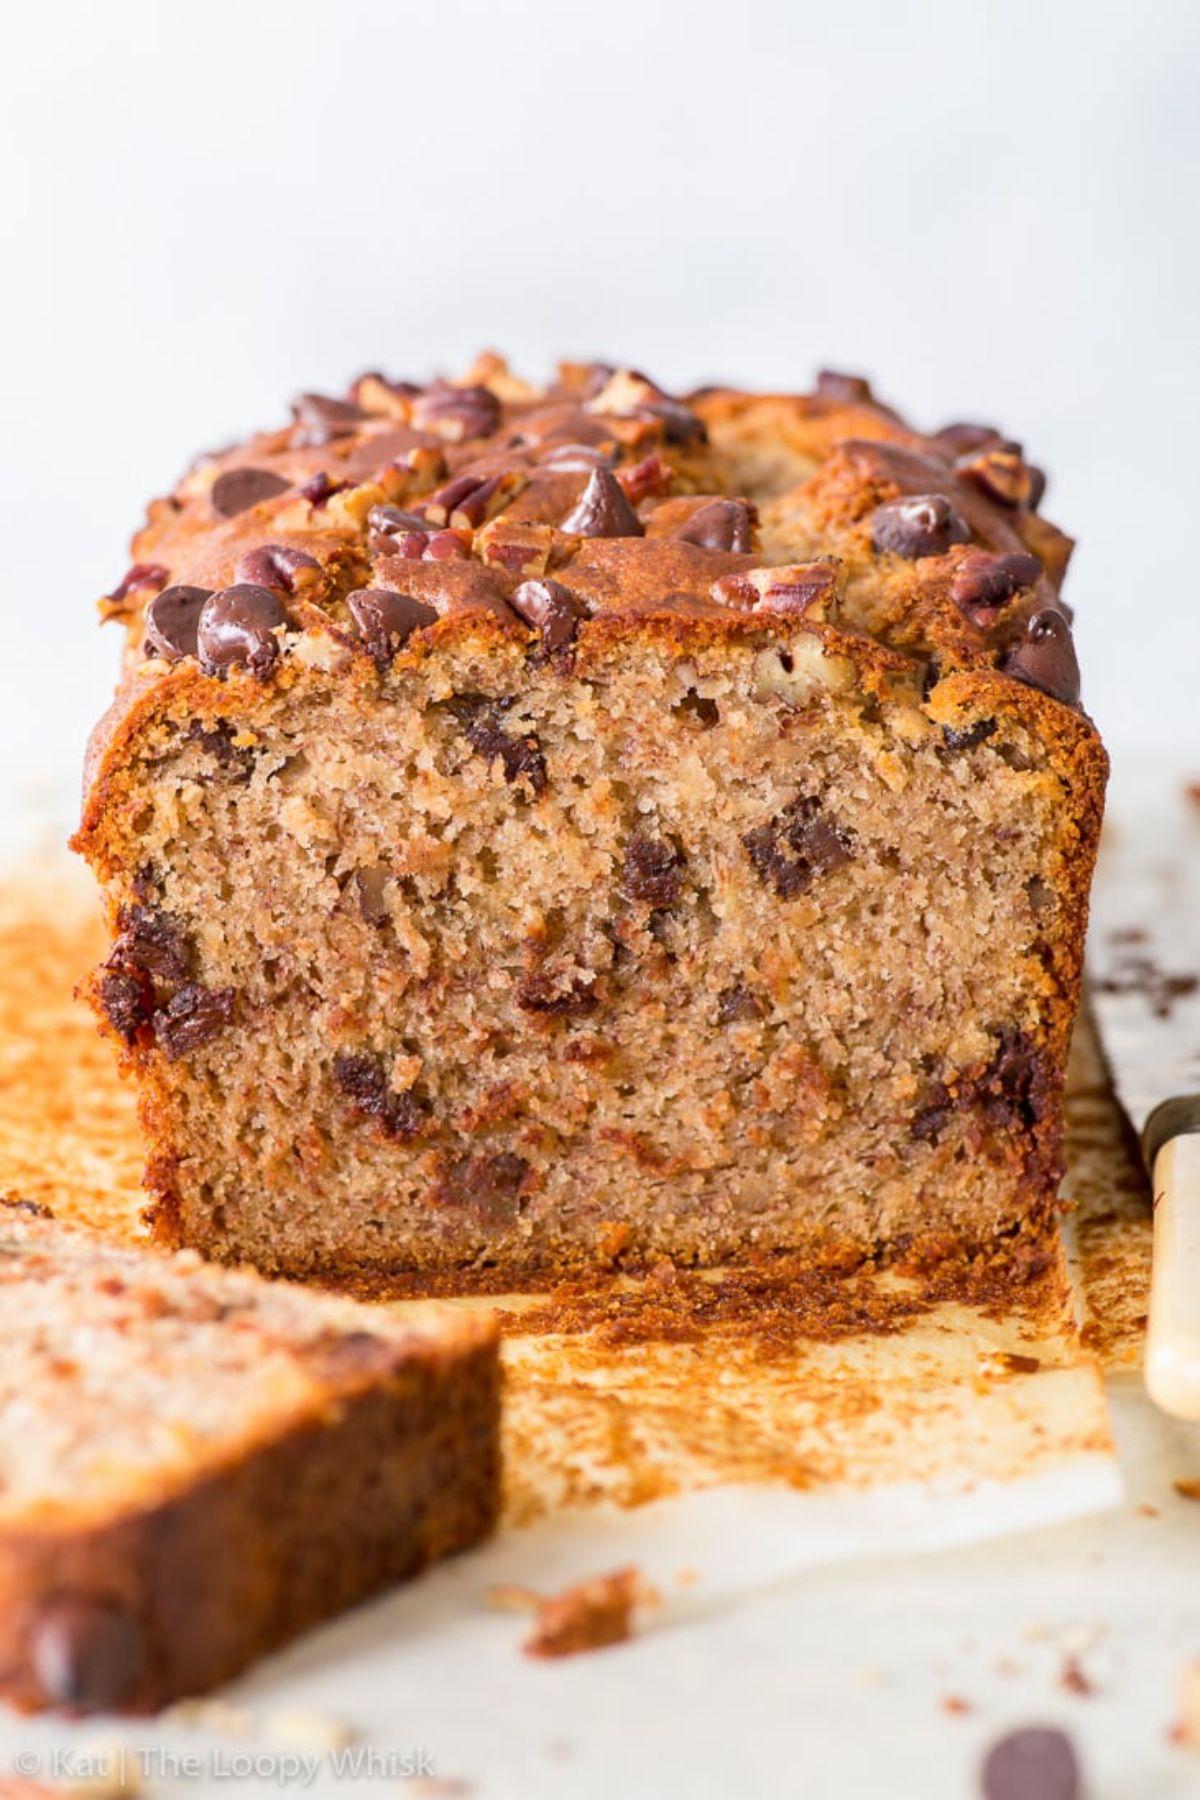 a loaf of vegan banana bread has been sliced open to reveal the inside. It is studded with chocolate chips